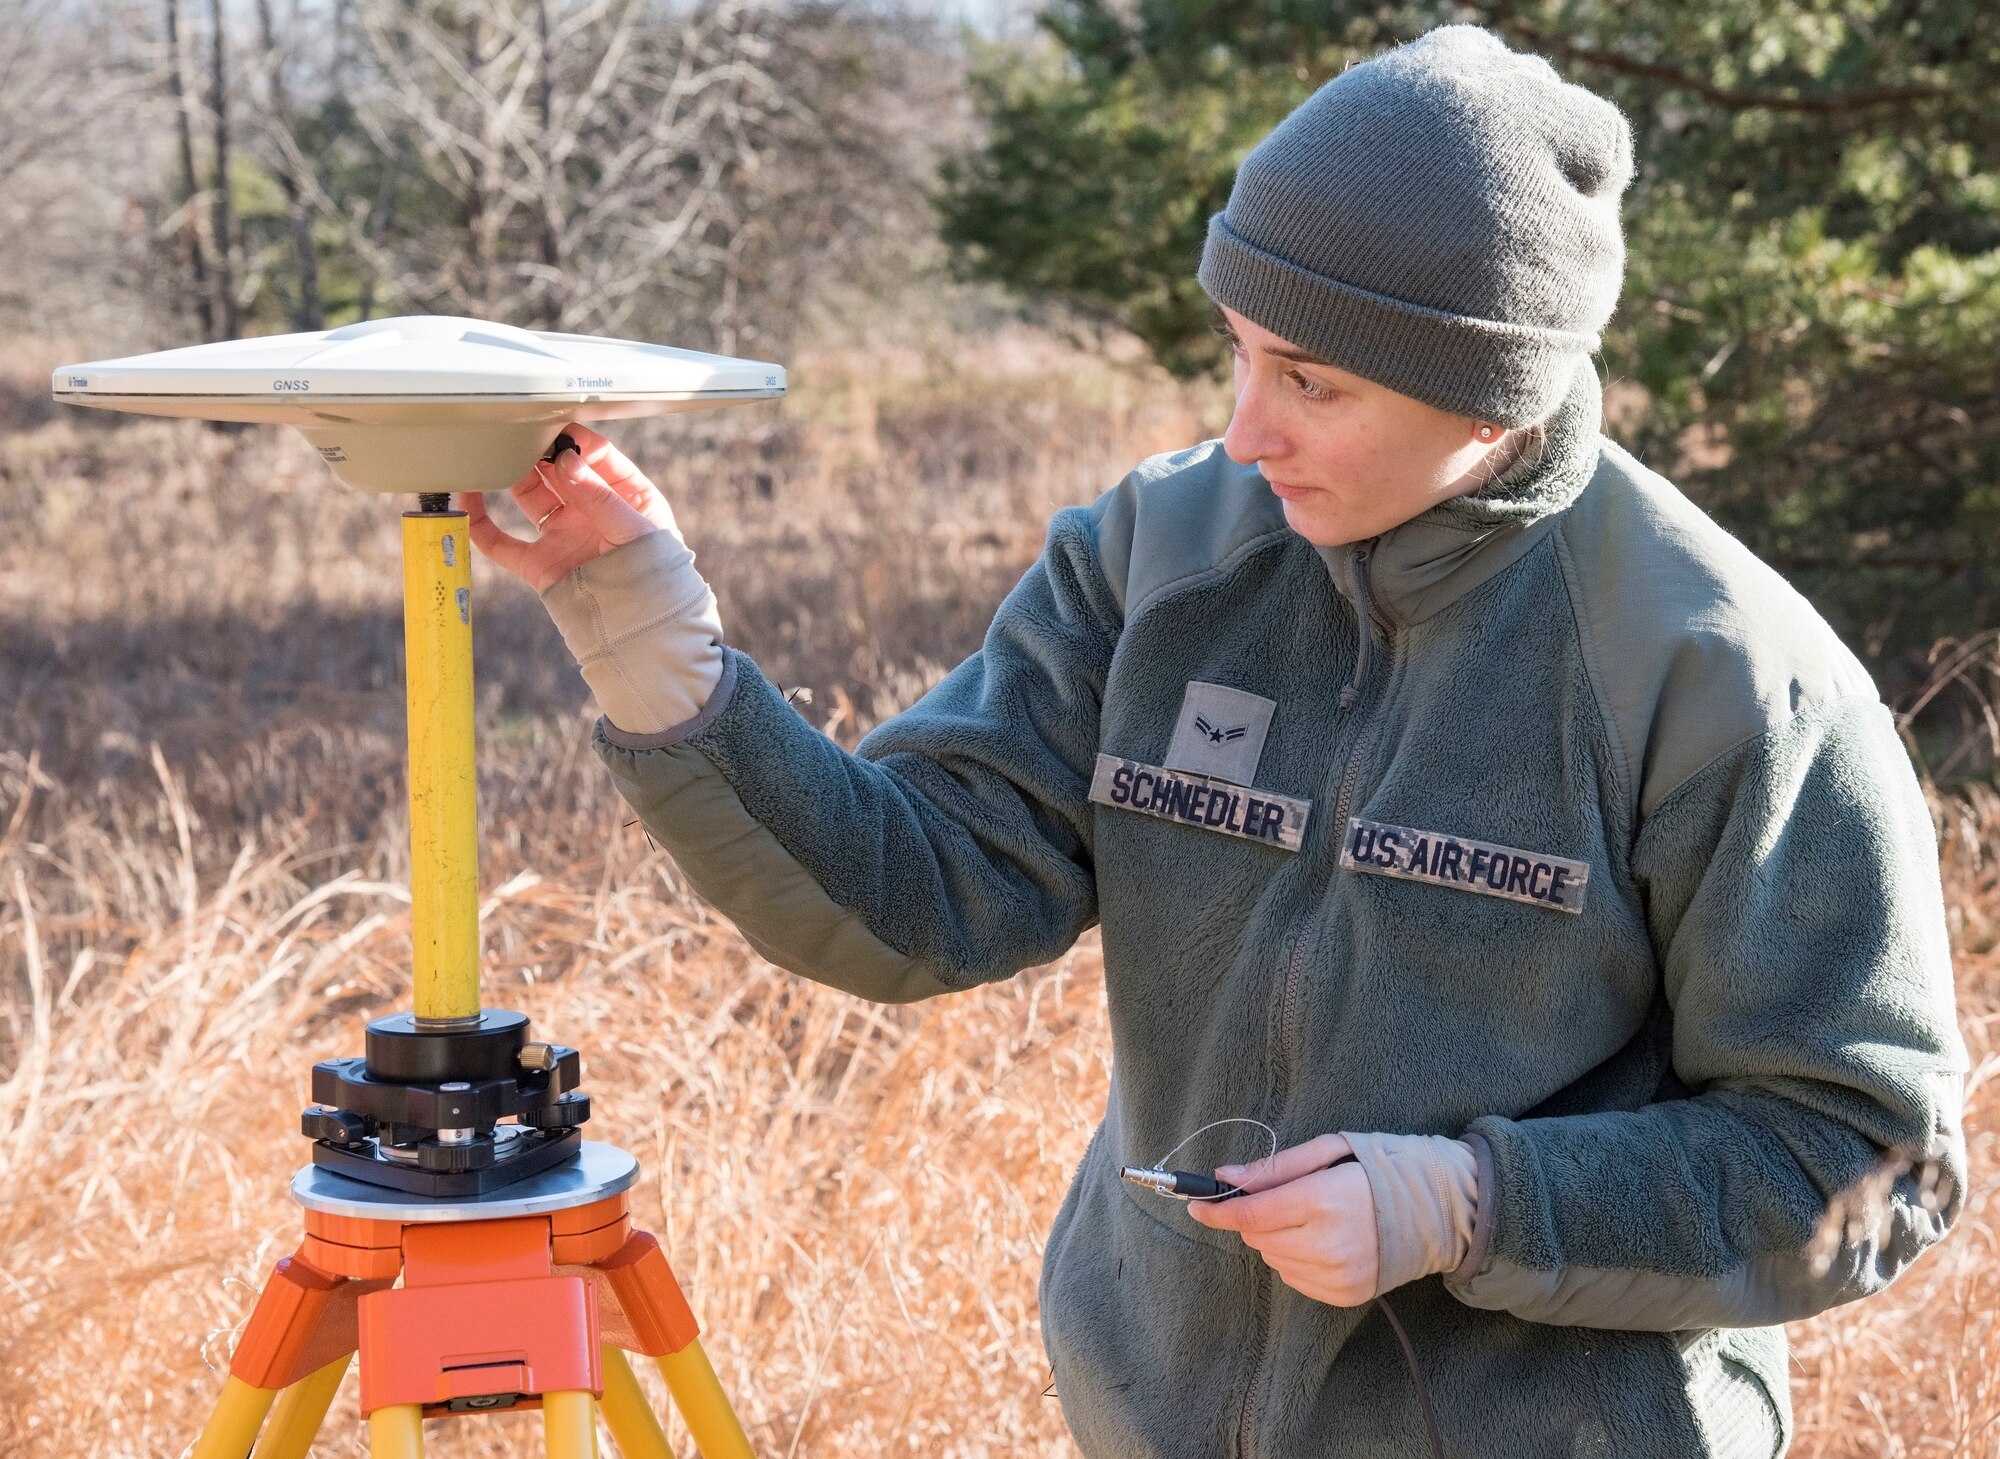 Airman 1st Class Angela Schnedler, 436th Civil Engineer Squadron engineering journeyman sets up a GPS surveying base station during an aircraft mishap survey exercise Dec. 18, 2018, near Killens Pond State Park, Kent County, Del. Schnedler ensured the base station was communicating with GPS satellites orbiting the Earth. (U.S. Air Force photo by Roland Balik)